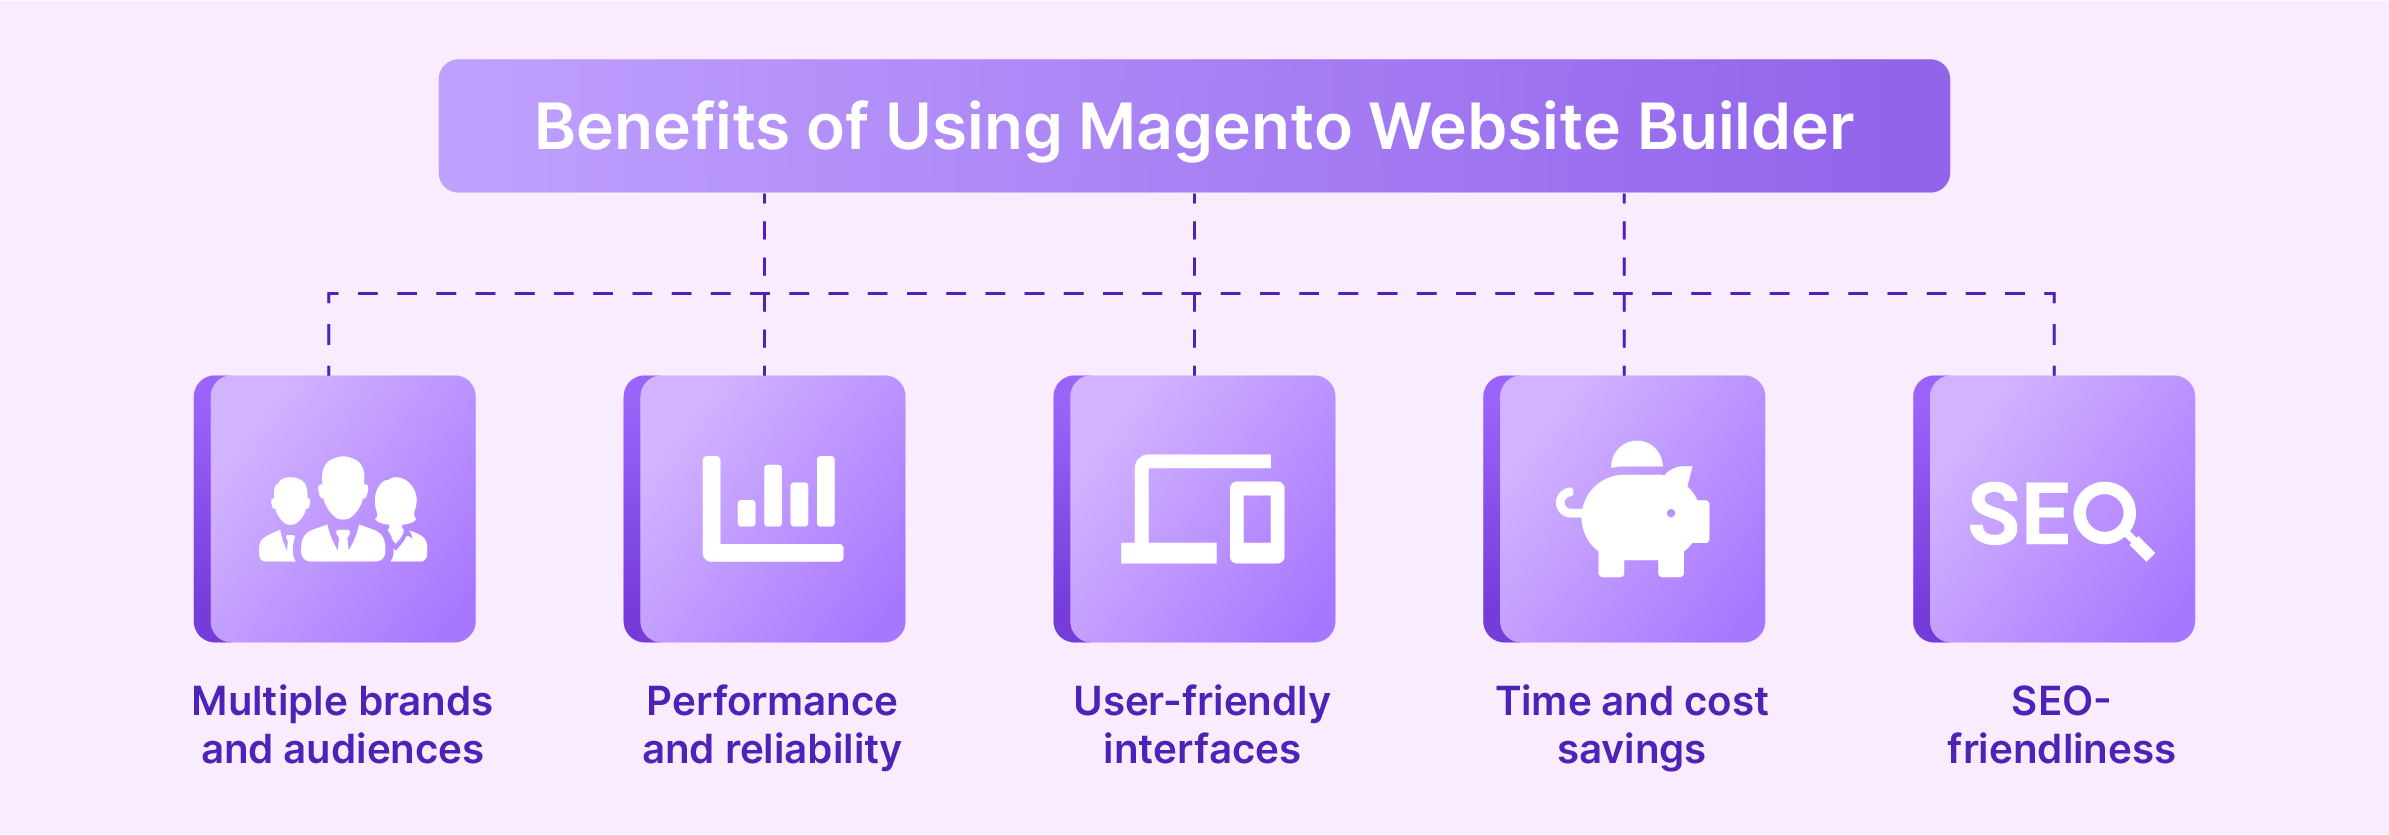 Magento's customizable templates and interfaces